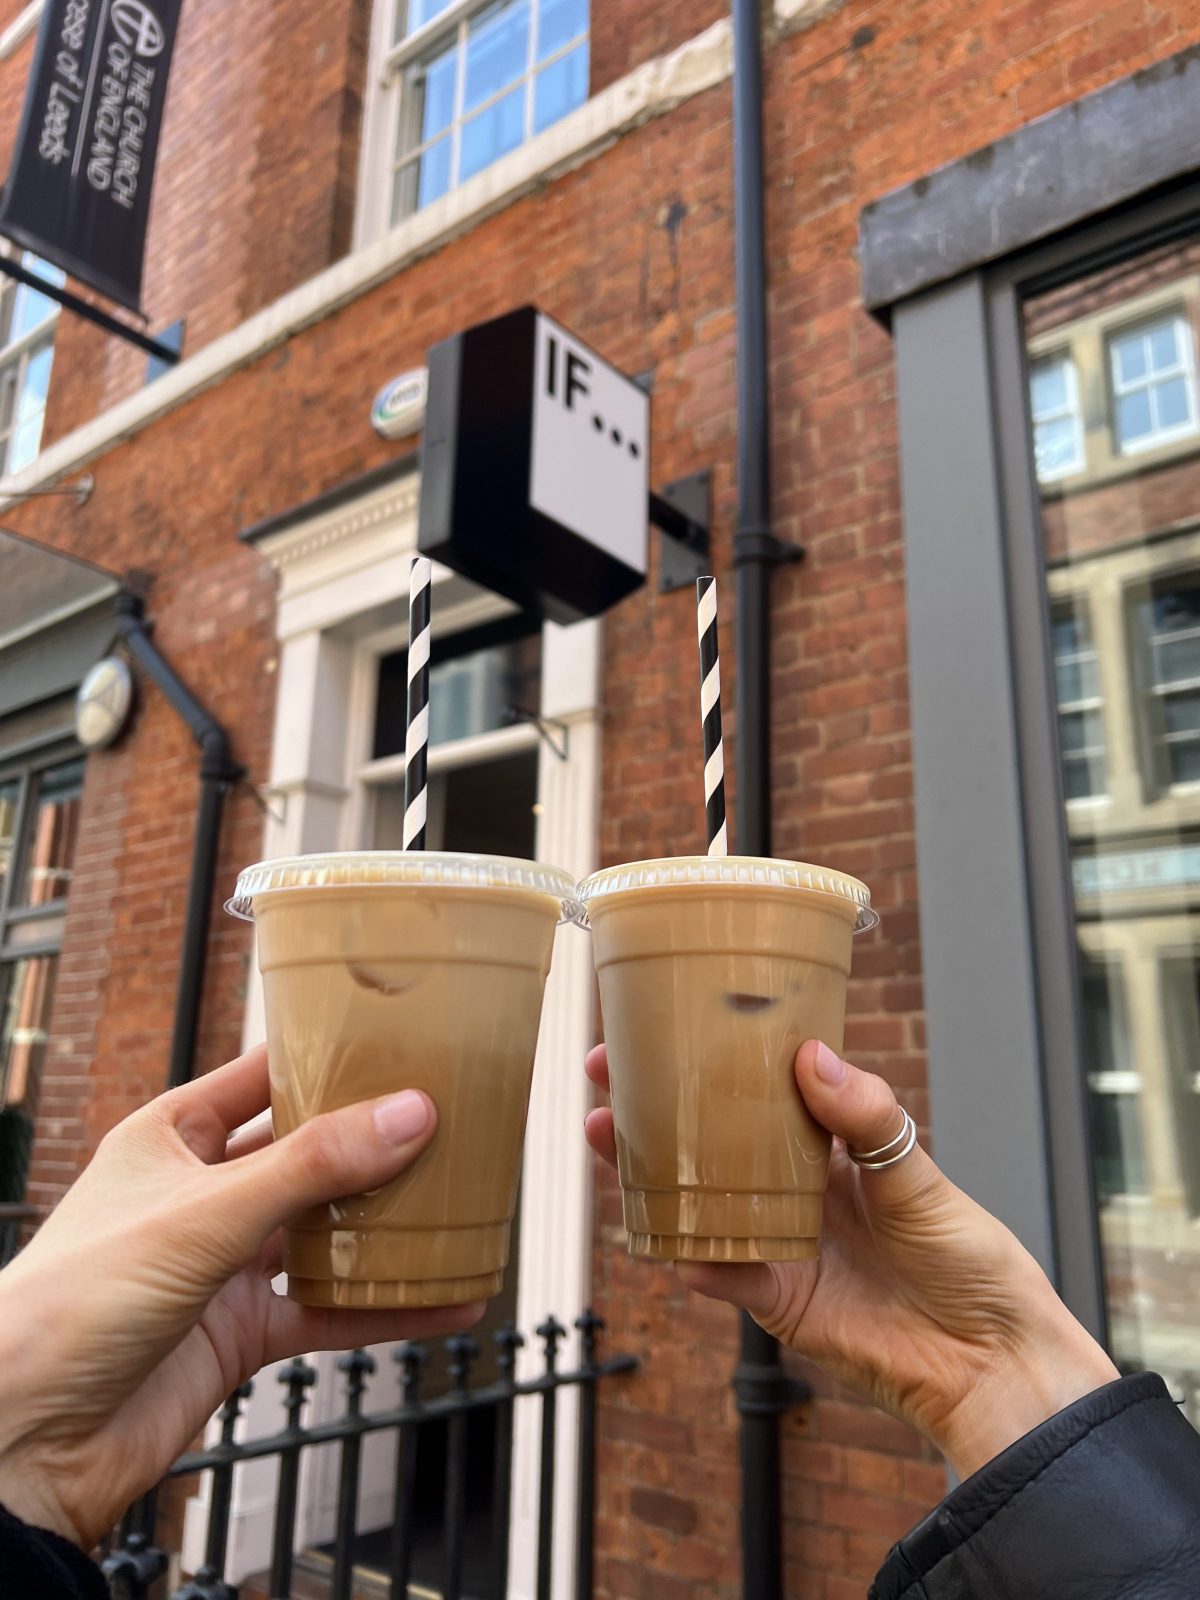 Two coffee cups held in the air outside a sign that reads 'IF...'.